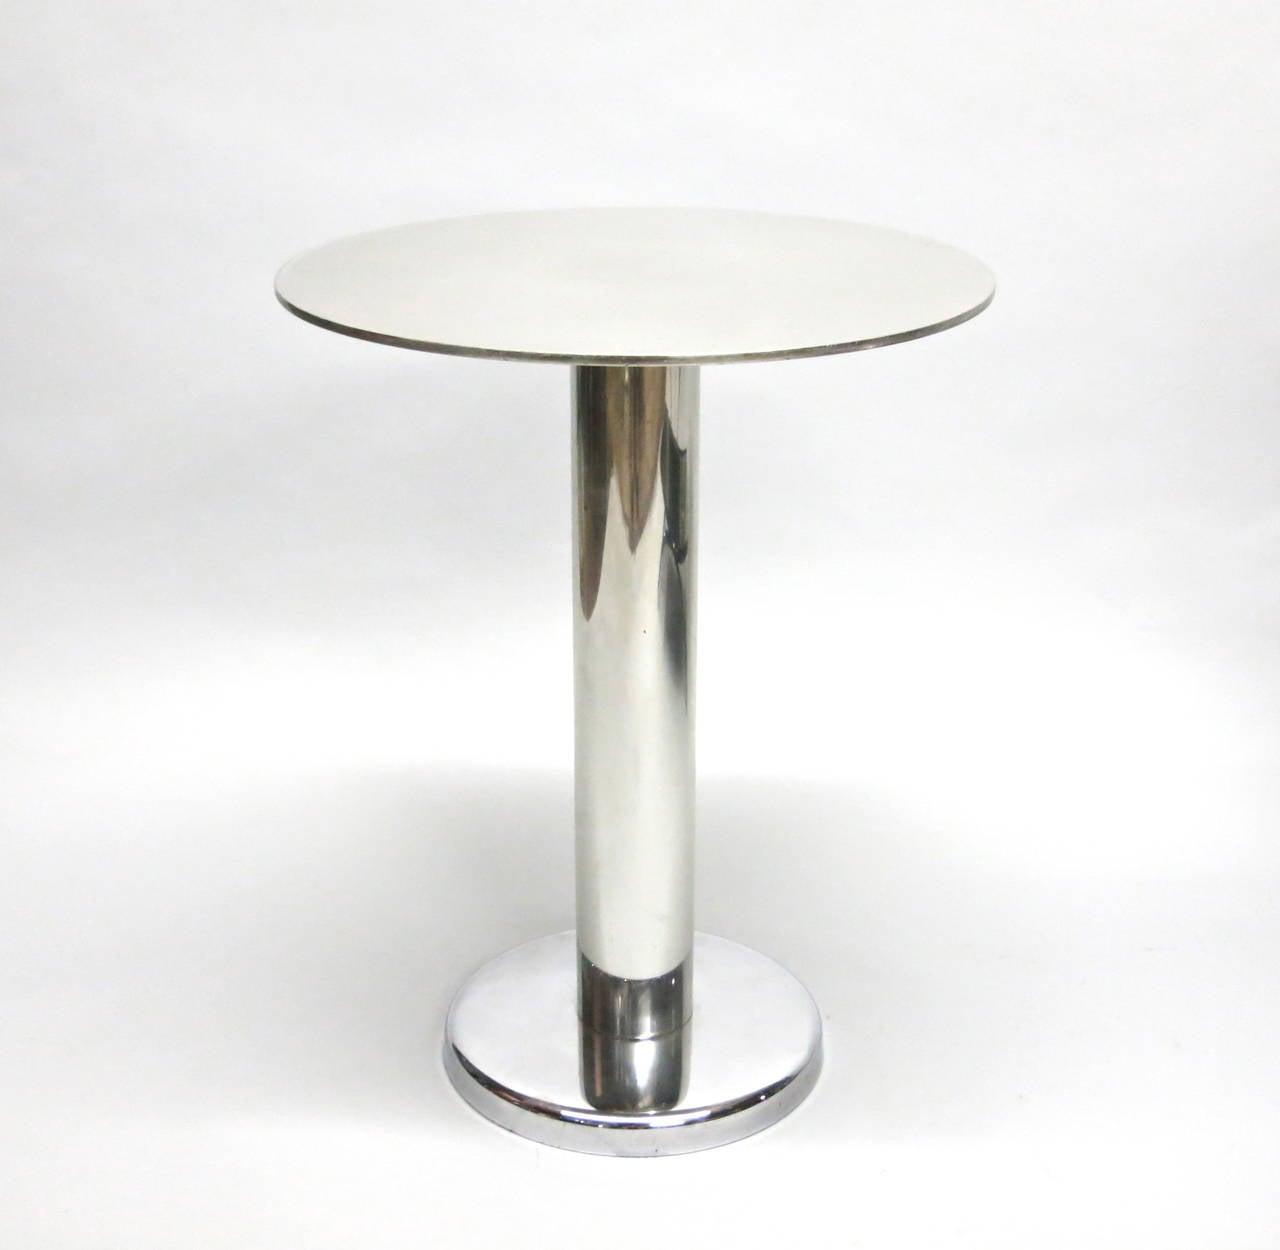 Set of four polished steel side tables with strong a deco design. Each table has a 3 inch tubular pedestal in the center that supports a 1/8 inch thick top with a 16 inch diameter. The base rises one inch off the floor with a round edge and a 10